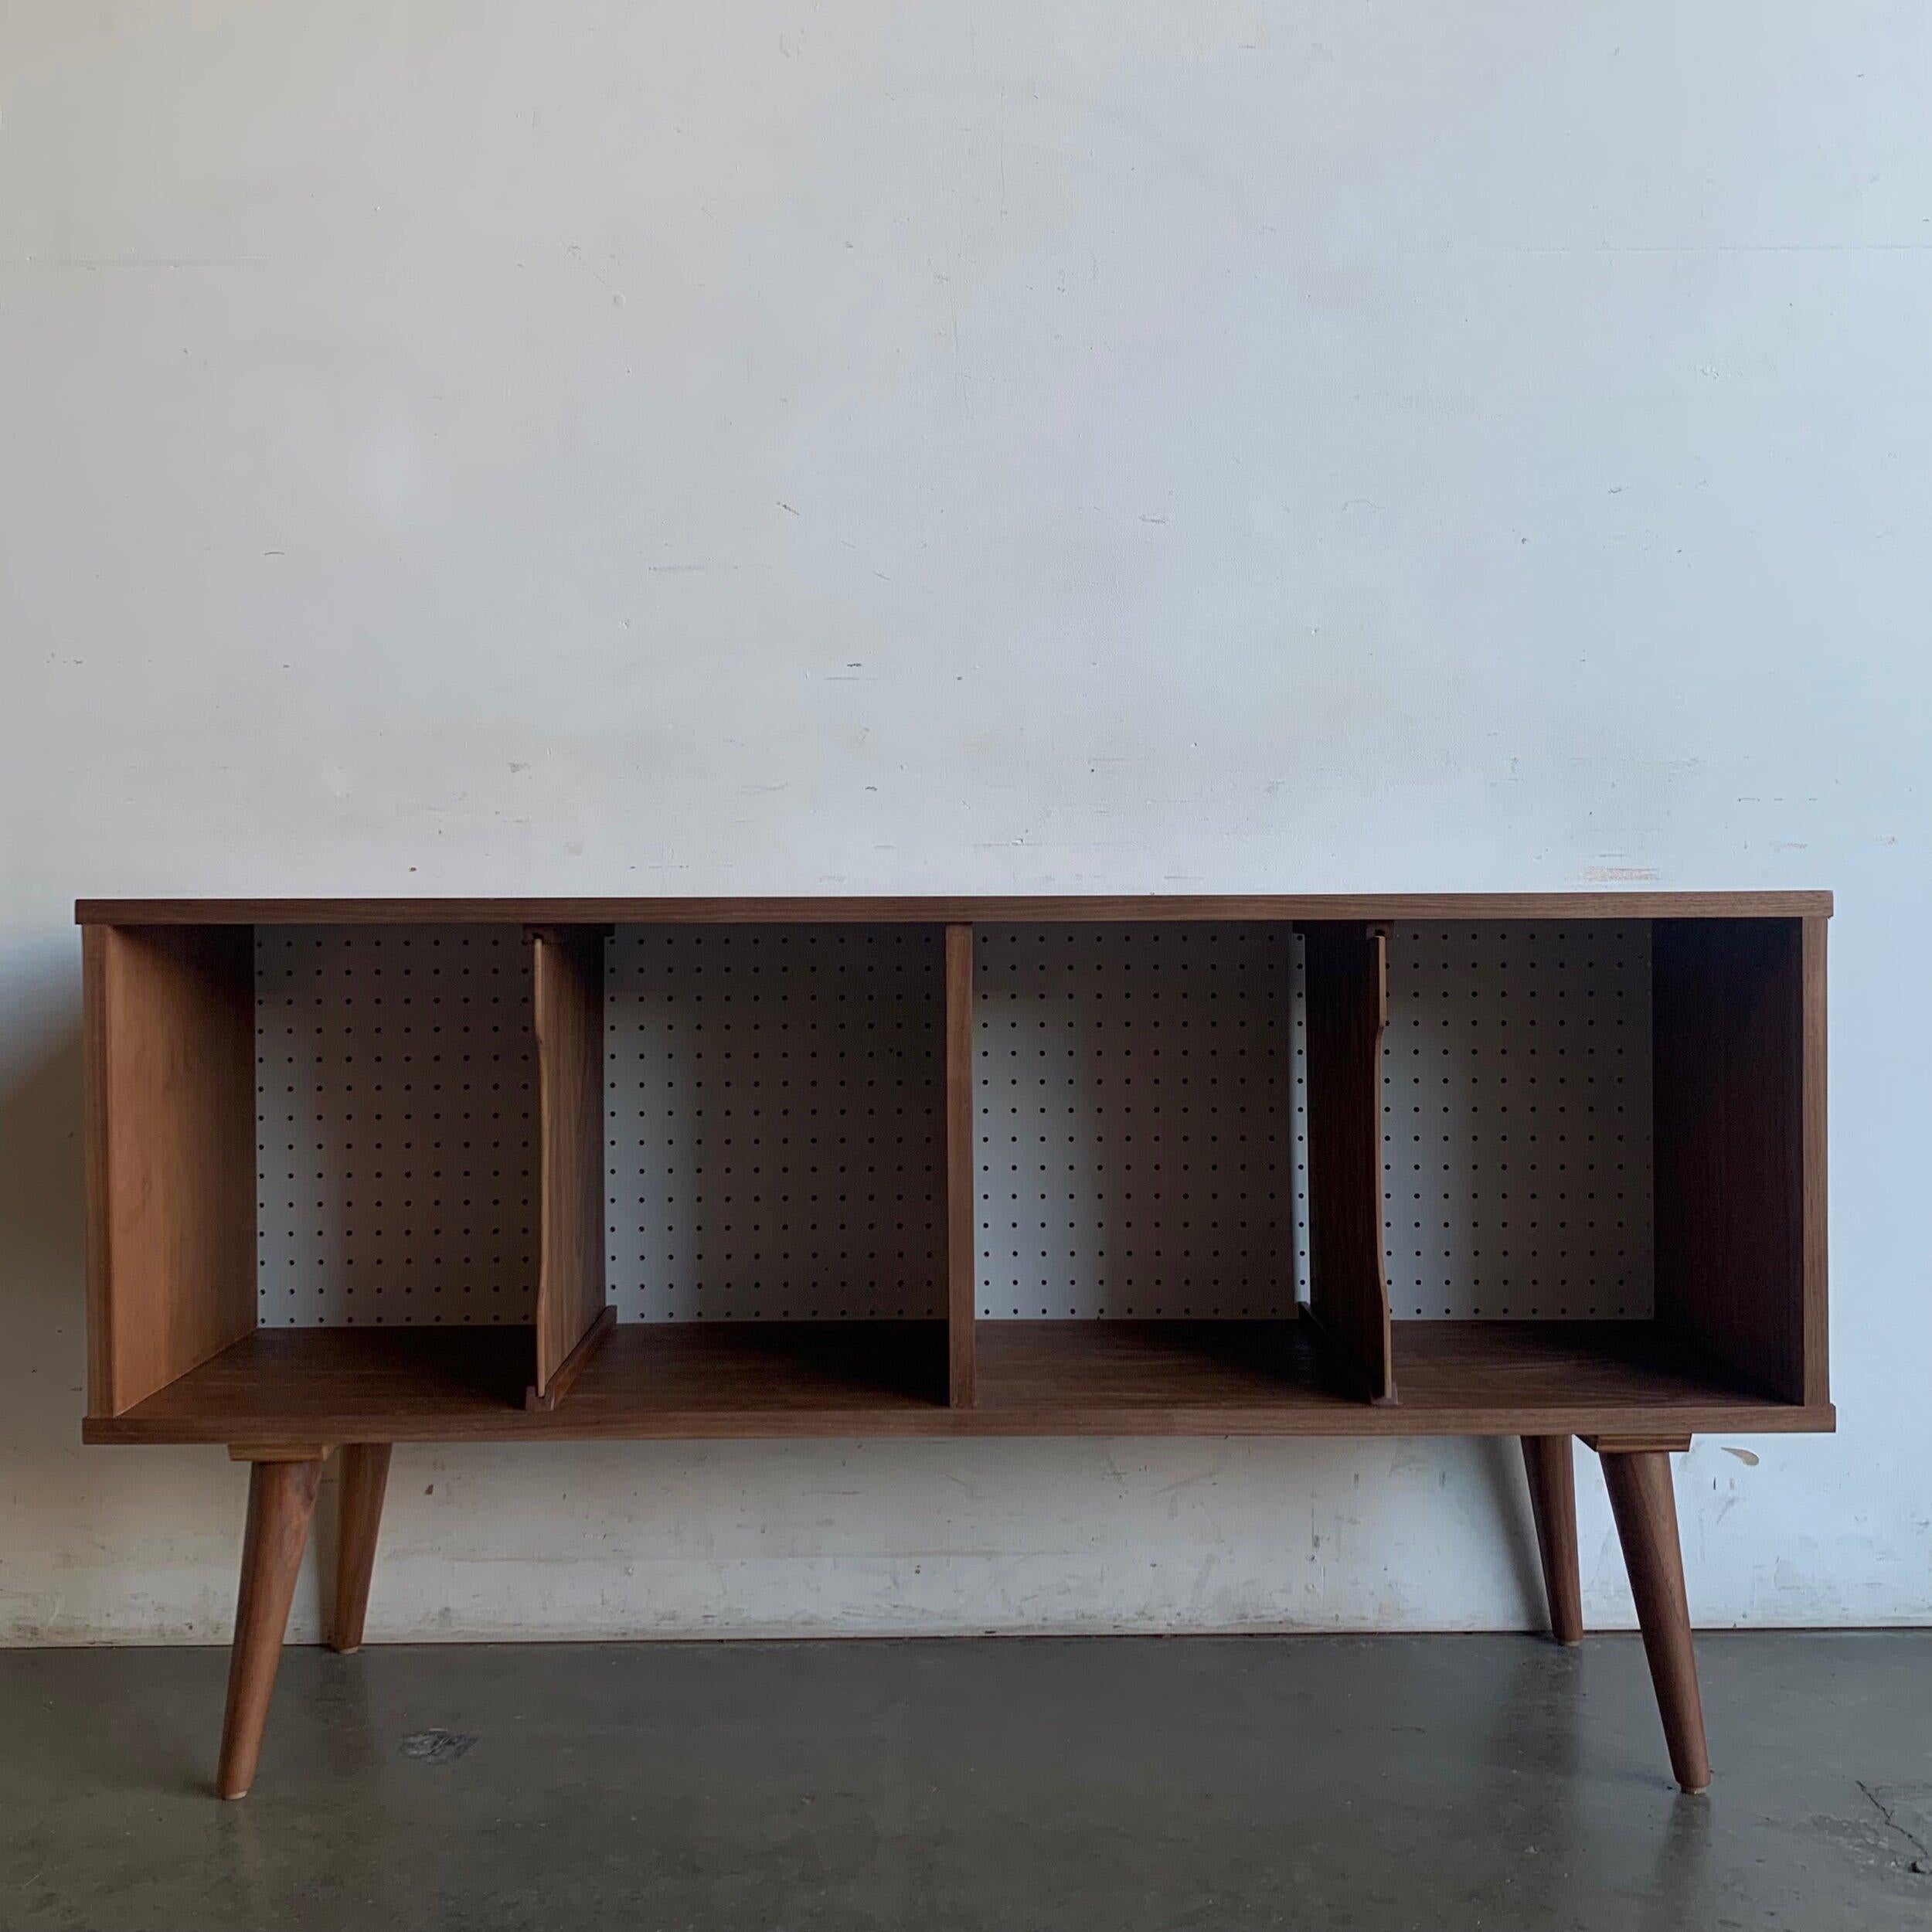 W50 D13.5 H26

This piece is custom made in house, item features removable center dividers and a white perforated backing.

This item is not currently available on the showroom floor but can be made available within 4-6 weeks after purchase in your